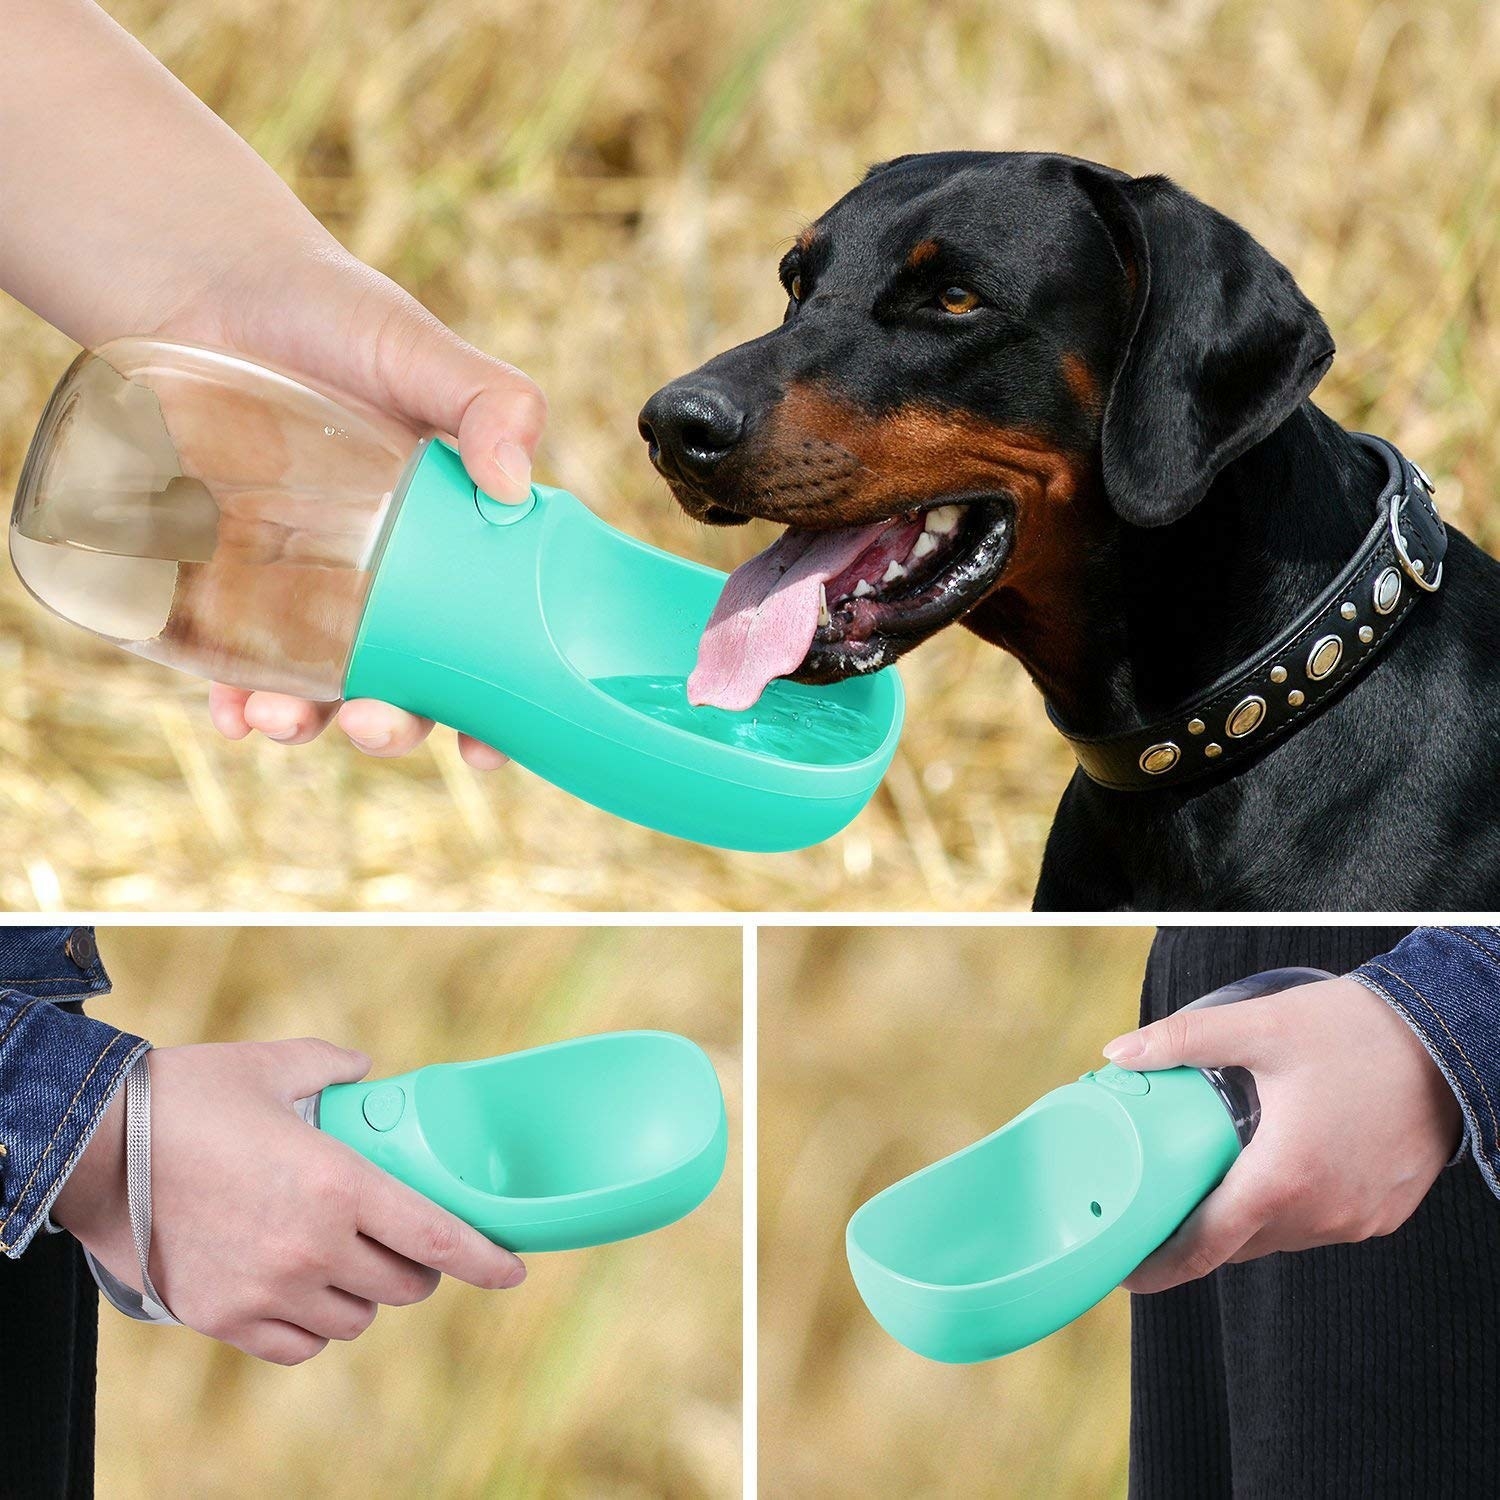 A collage of images showing a dog drinking from the bottle, and two angles of a hand holding it.